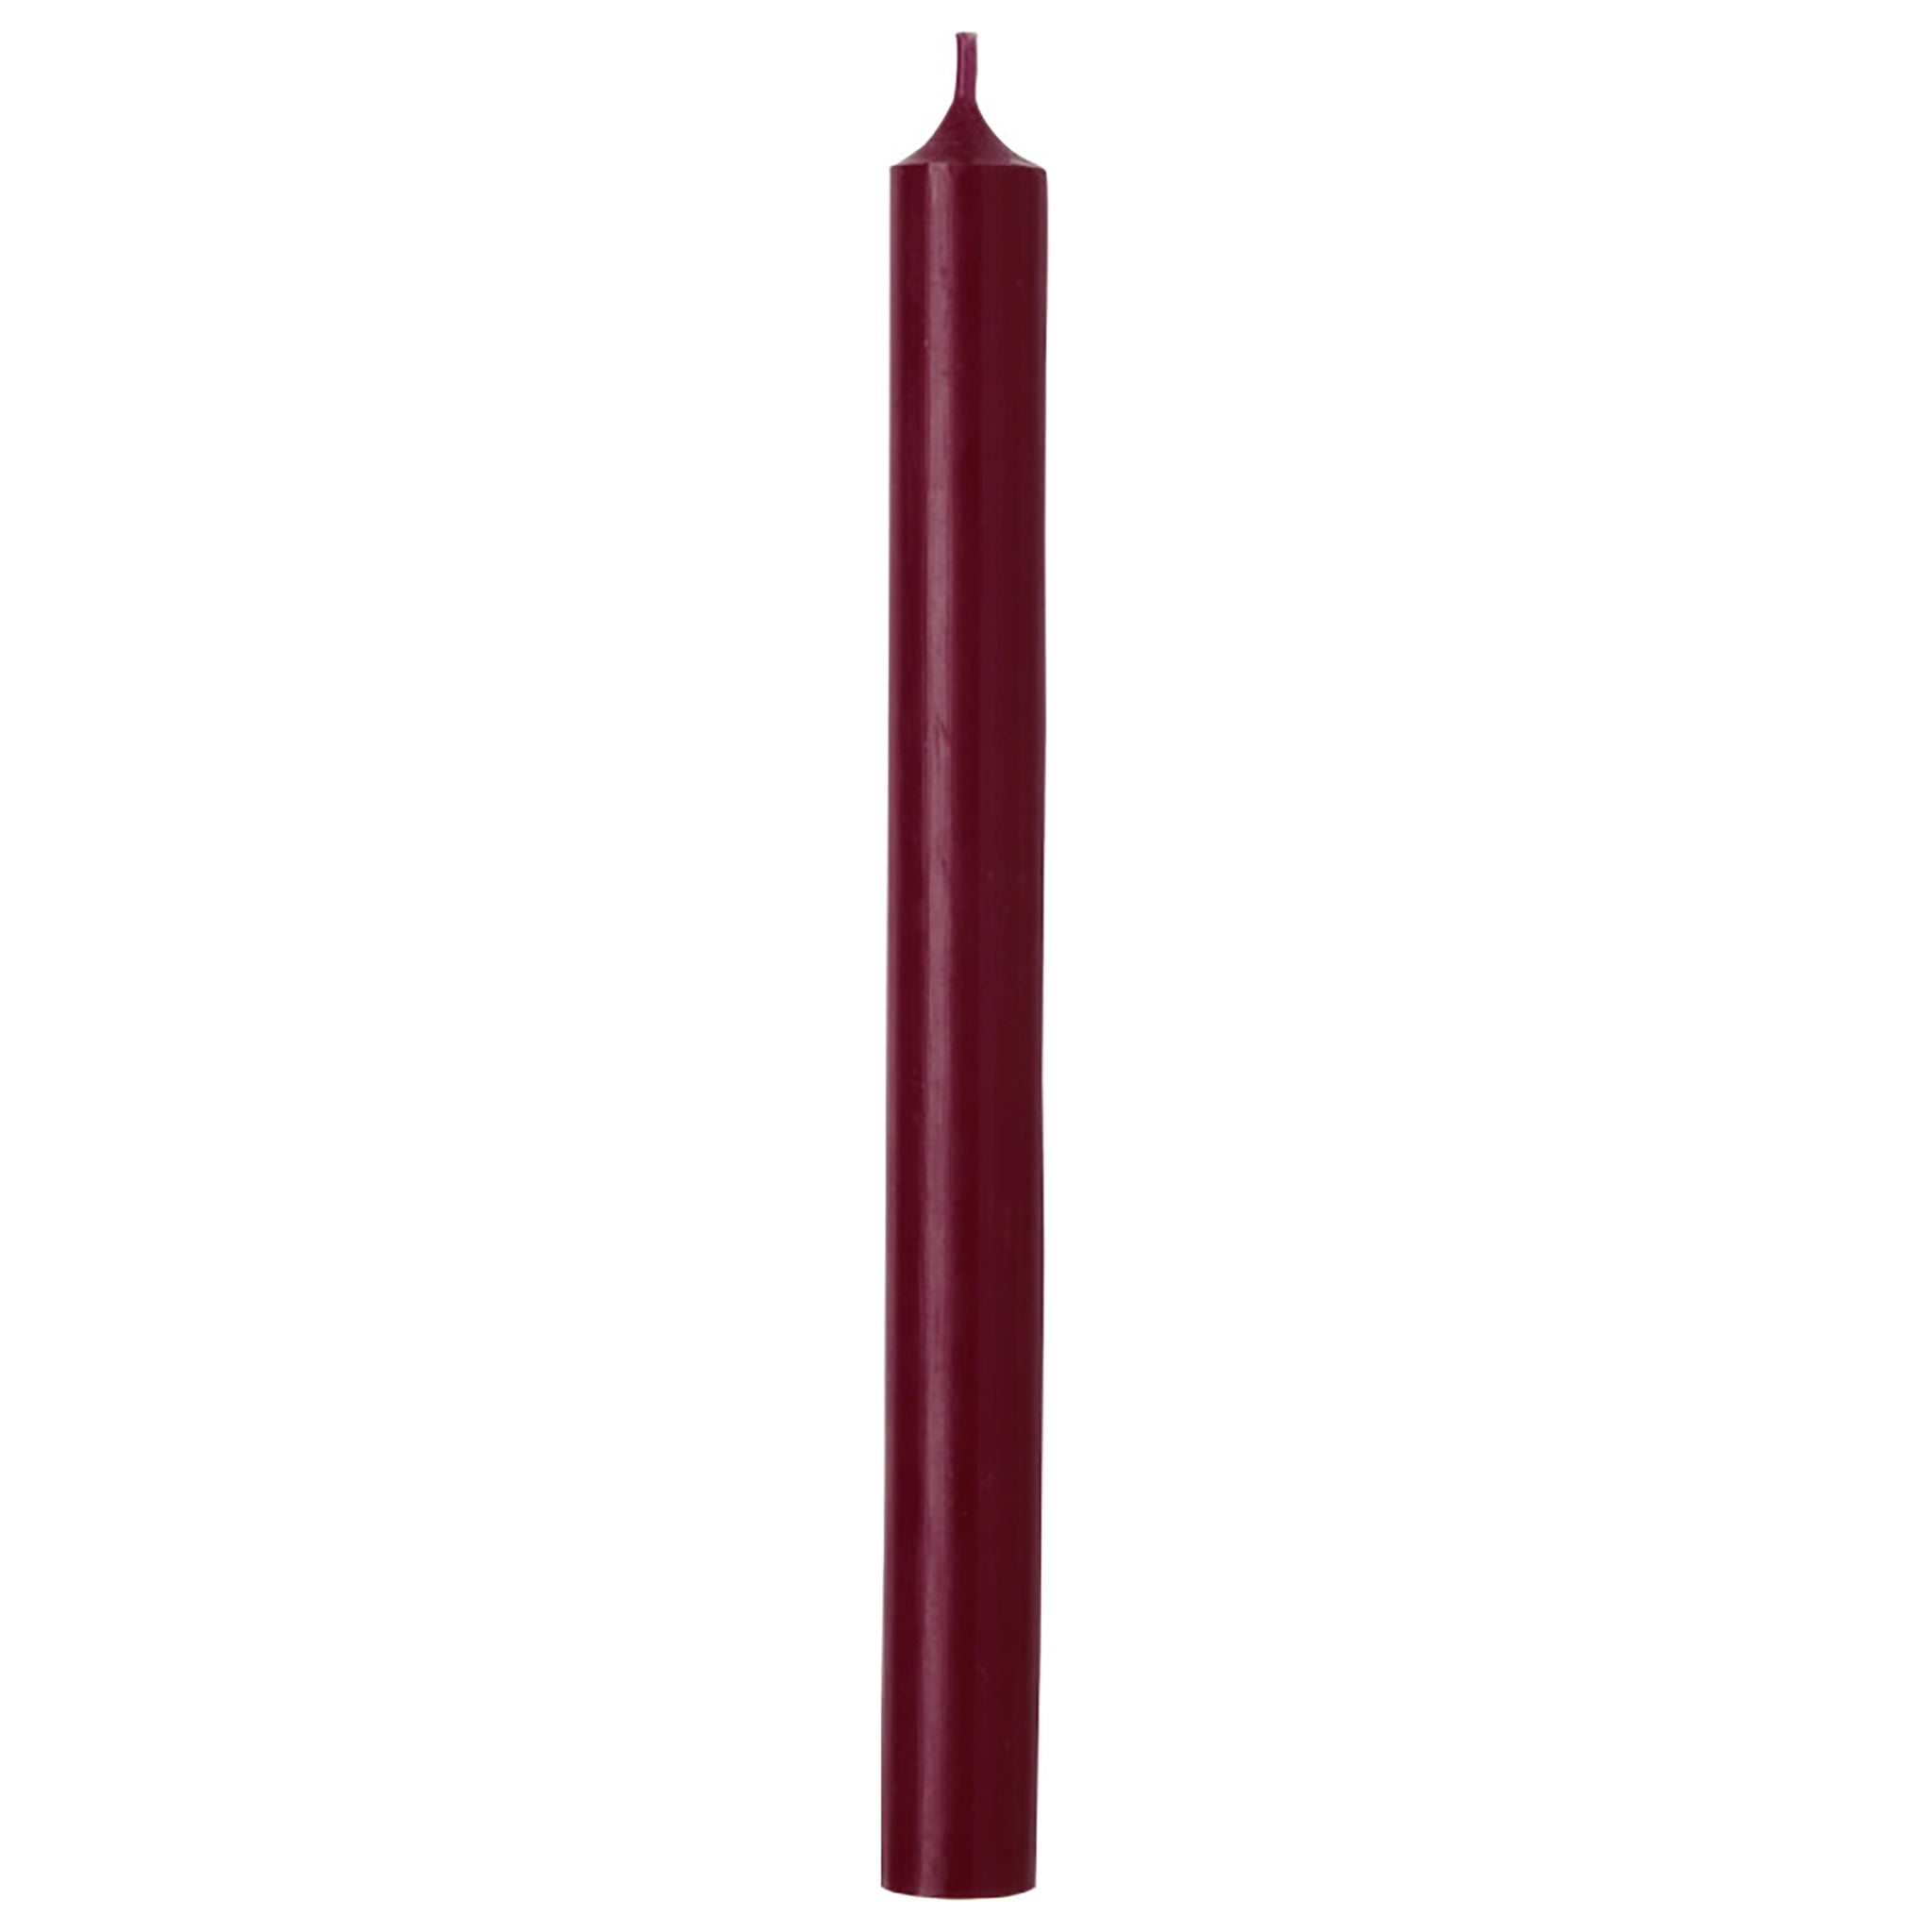 Tall dinner candle with simple straight cylinder shape in rich plum red colour